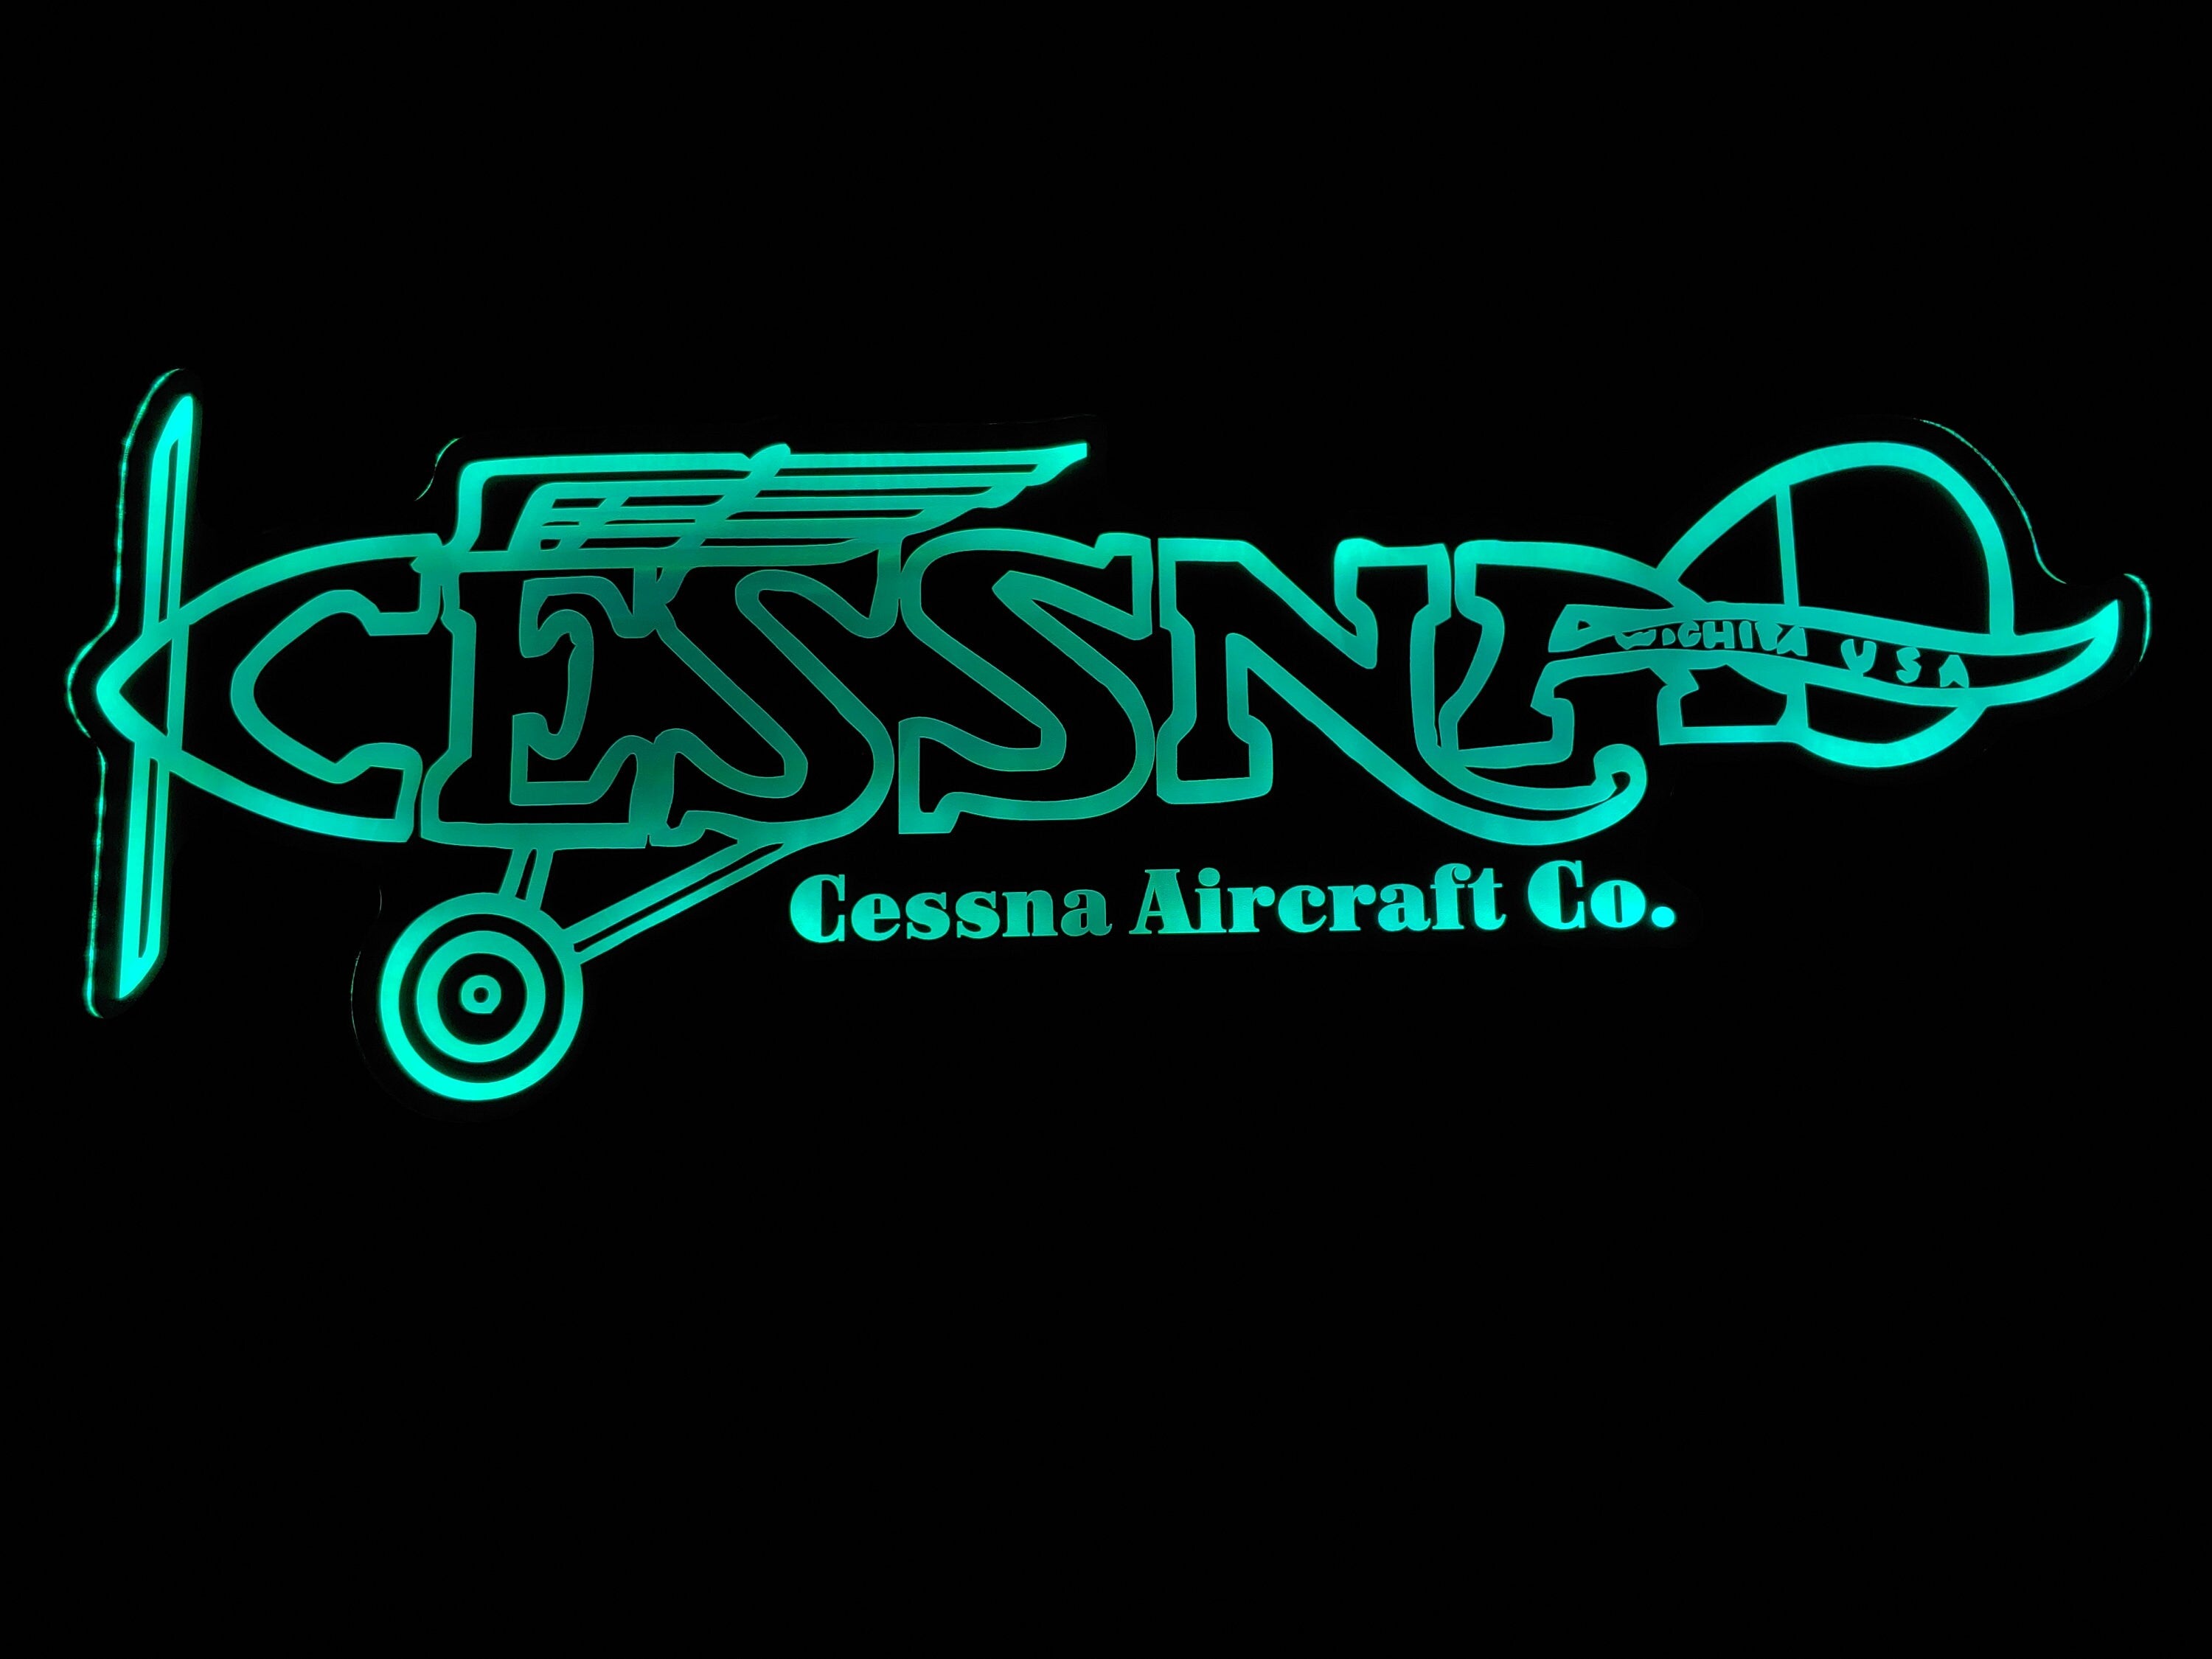 Vintage Cessna Acrylic Led Wall Sign - Night Light Neon Like - Color Changing - 2 Sizes - Free Shipping